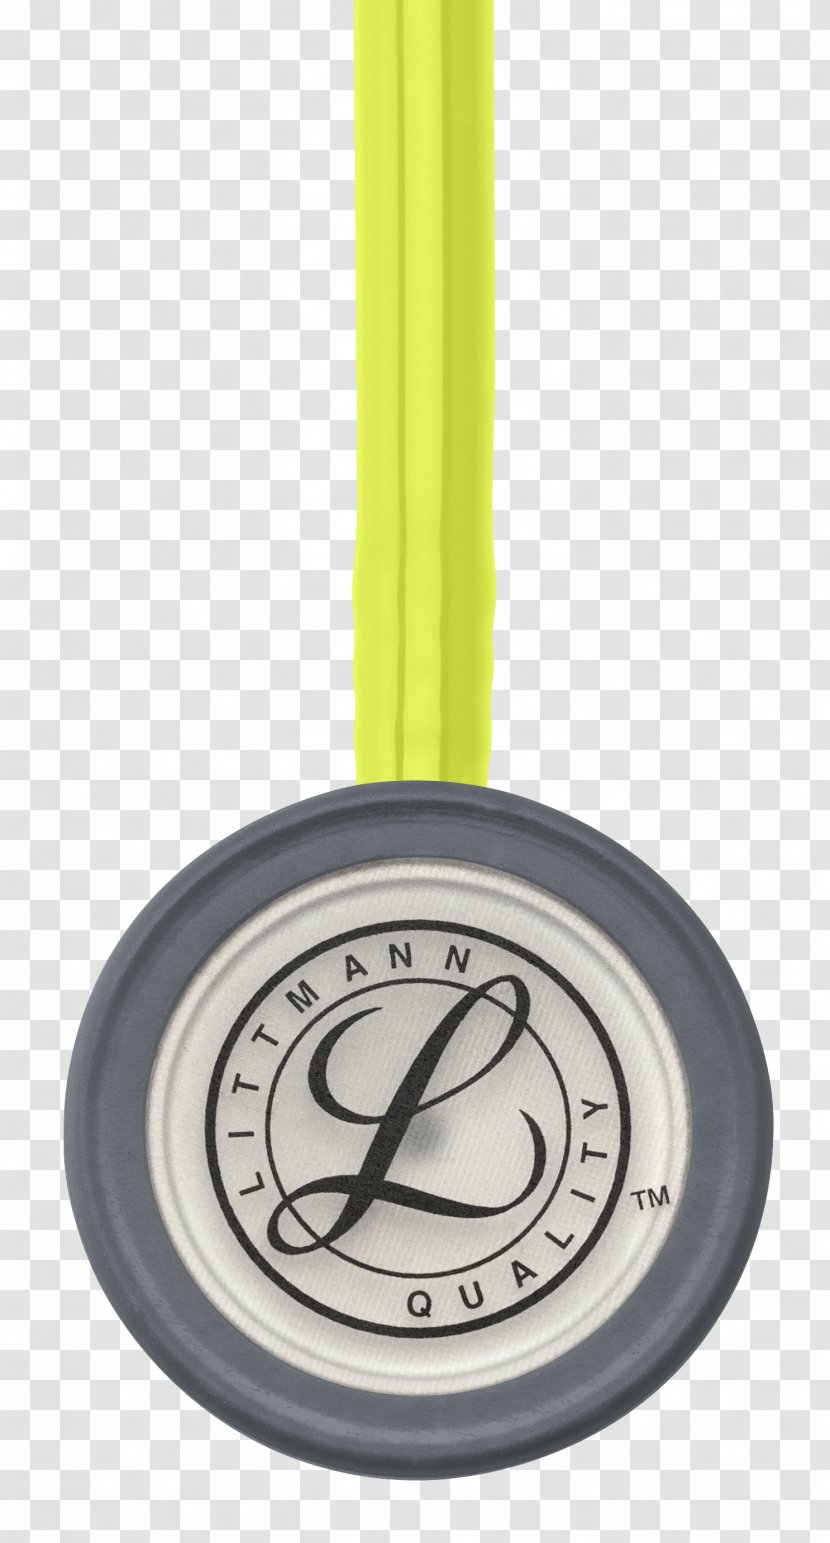 Stethoscope Medicine Auscultation Medical Equipment Welch Allyn - Yellow - Lemon And Lime Transparent PNG